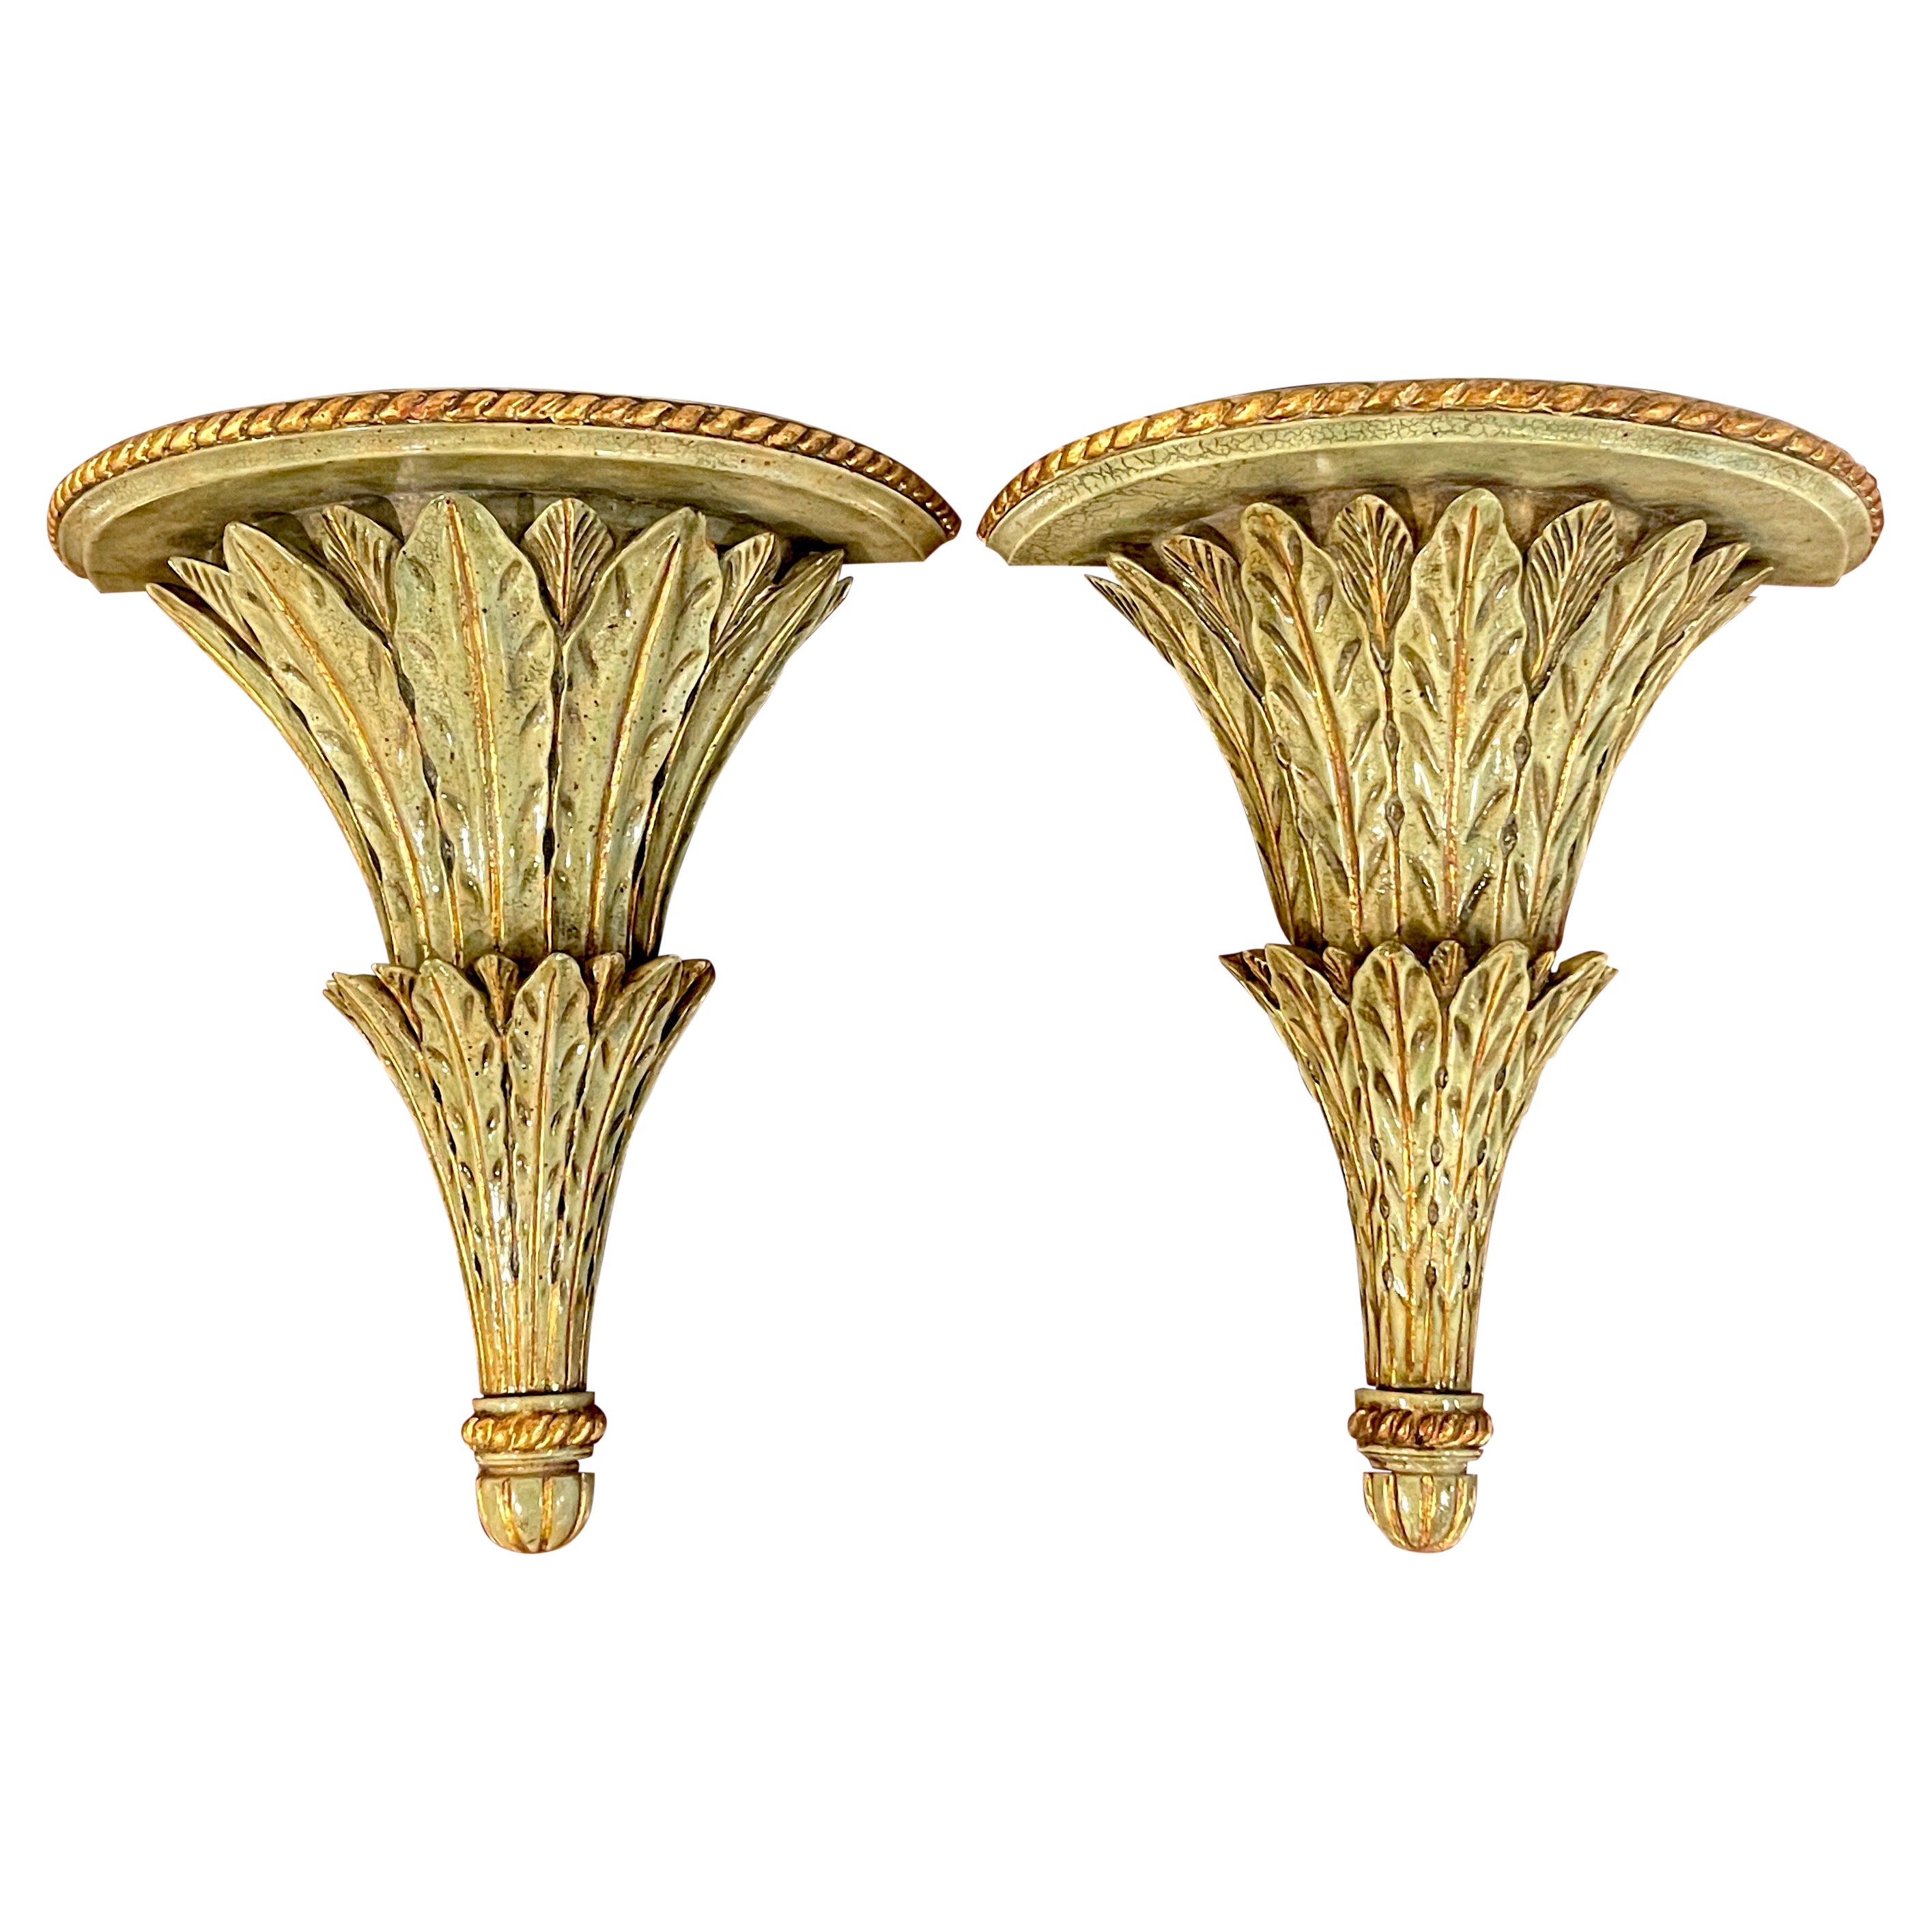 Pair of Regency Style 'Lettuce' Gilt Lacquered Wall Brackets